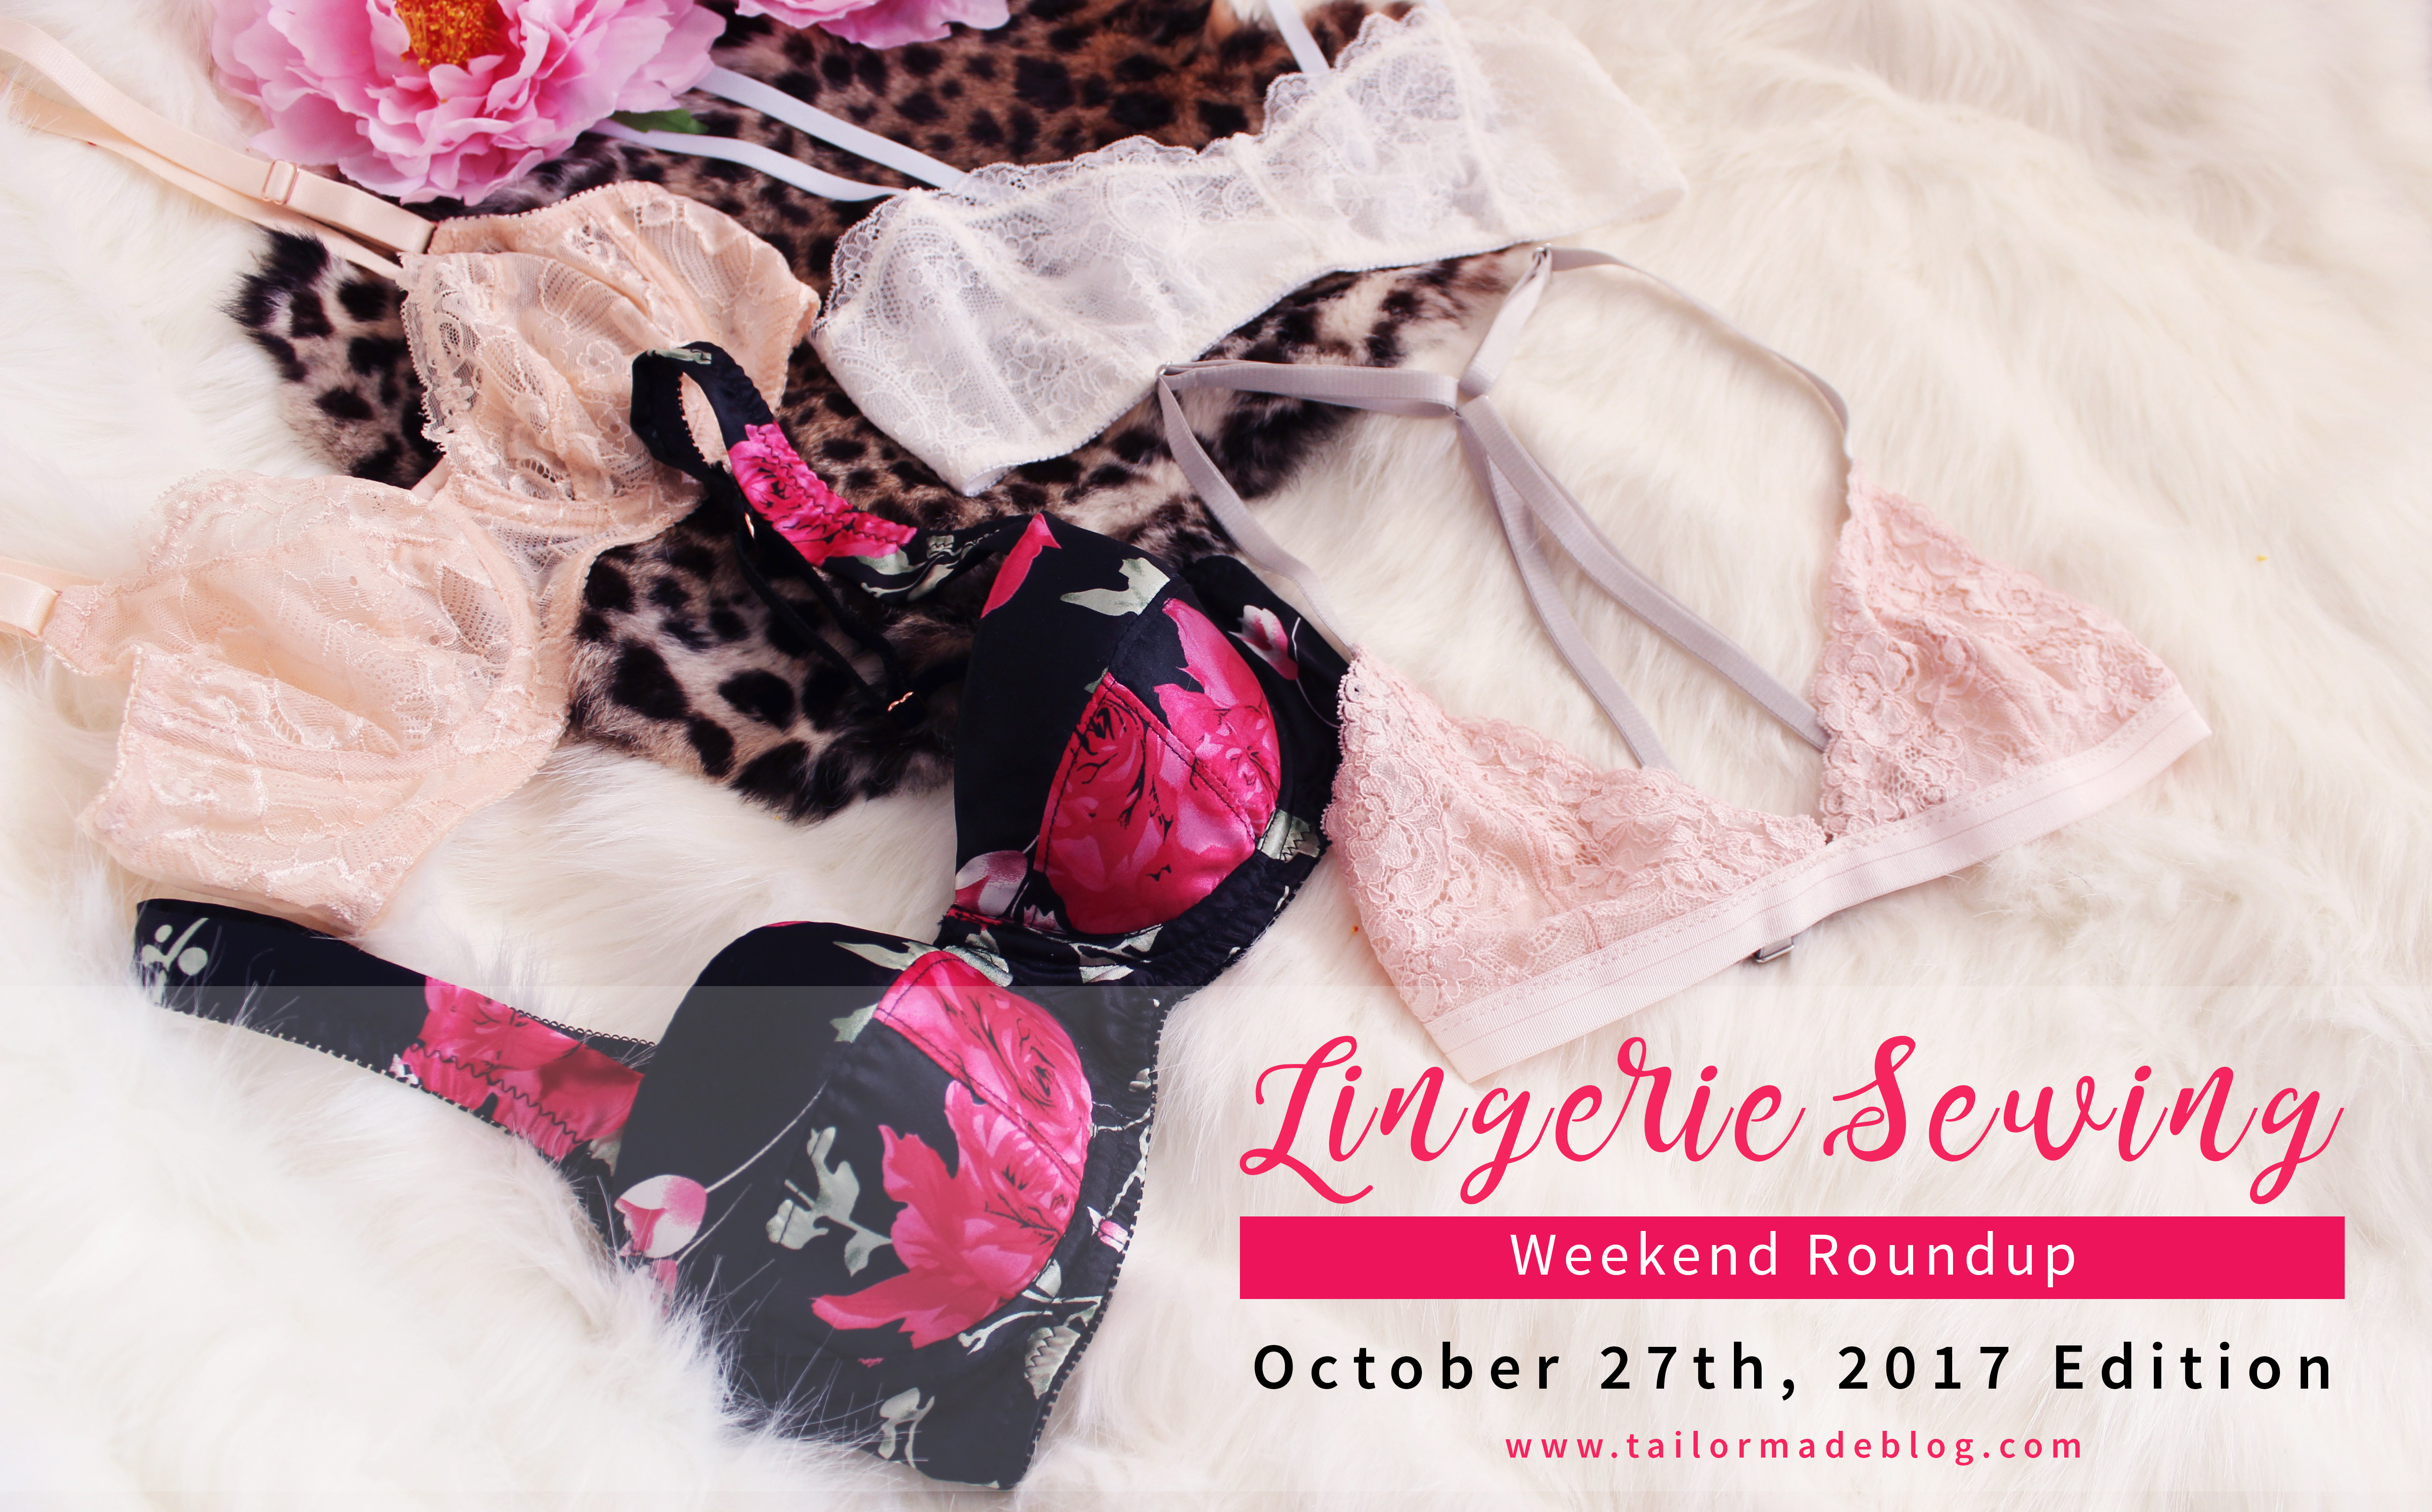 October 27th 2017 Lingerie Sewing Weekend Round Up Latest news and makes and sewing projects from the lingerie sewing bra making community